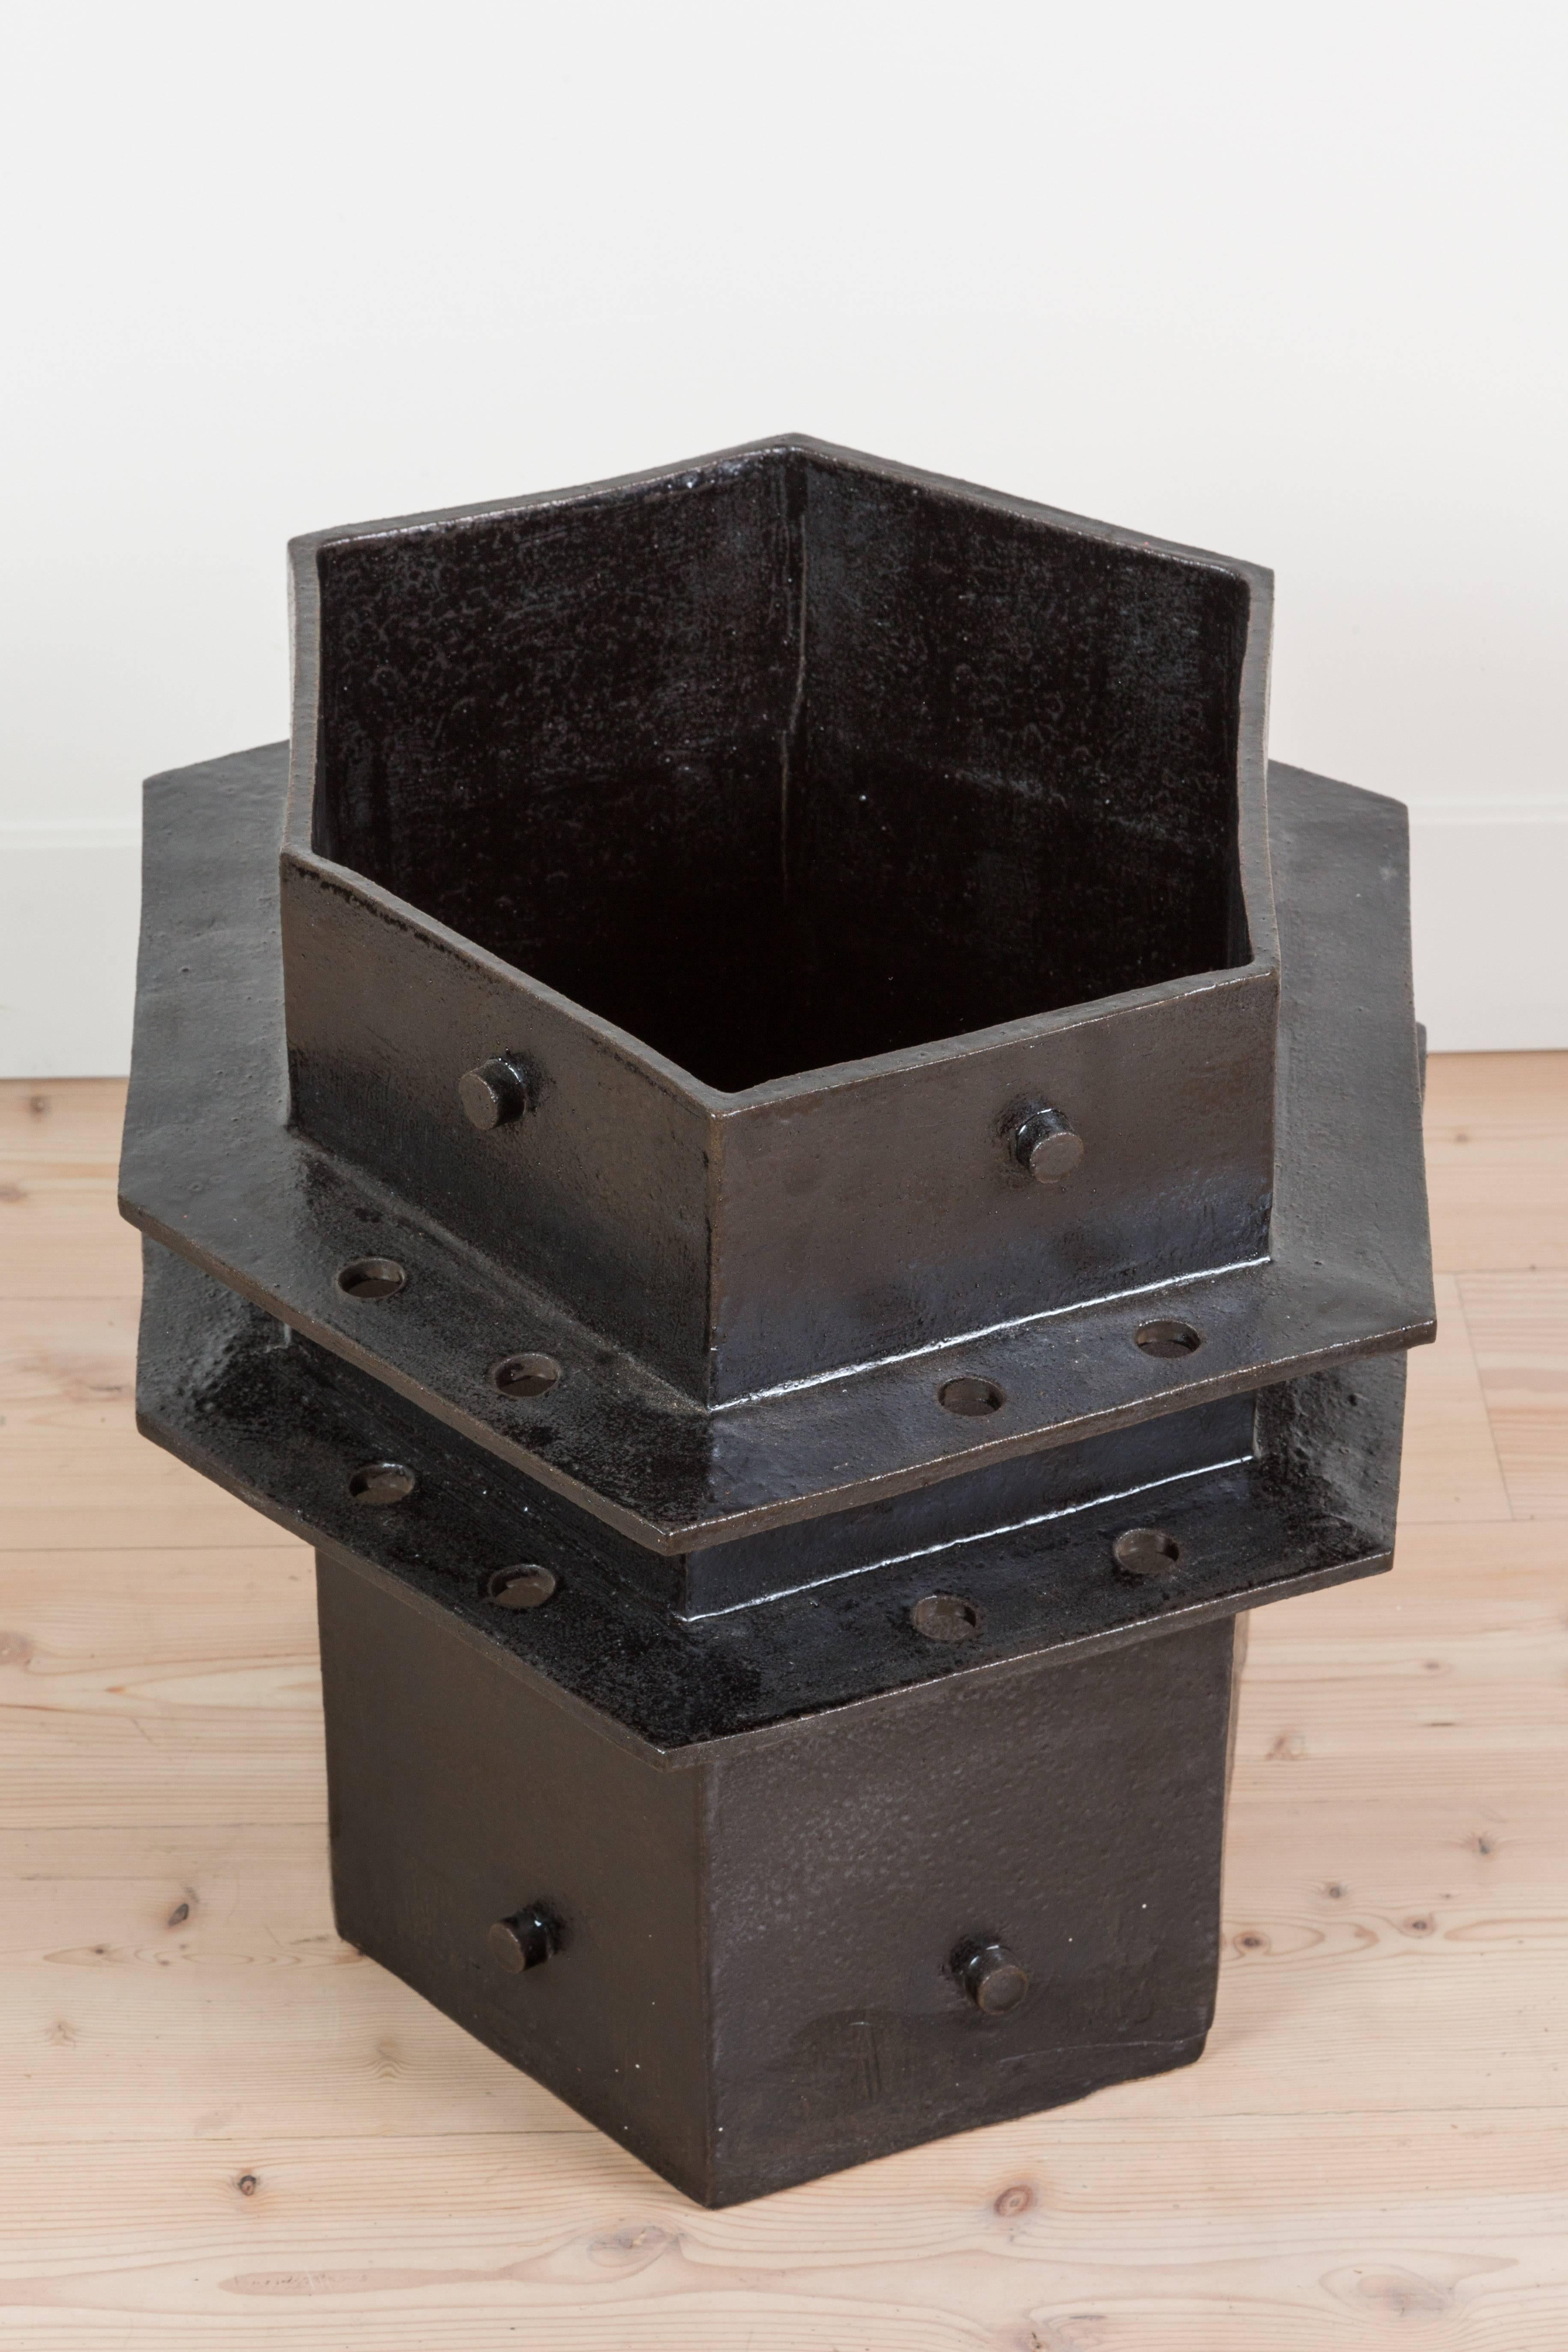 Extra large hex planter by Bari Ziperstein.